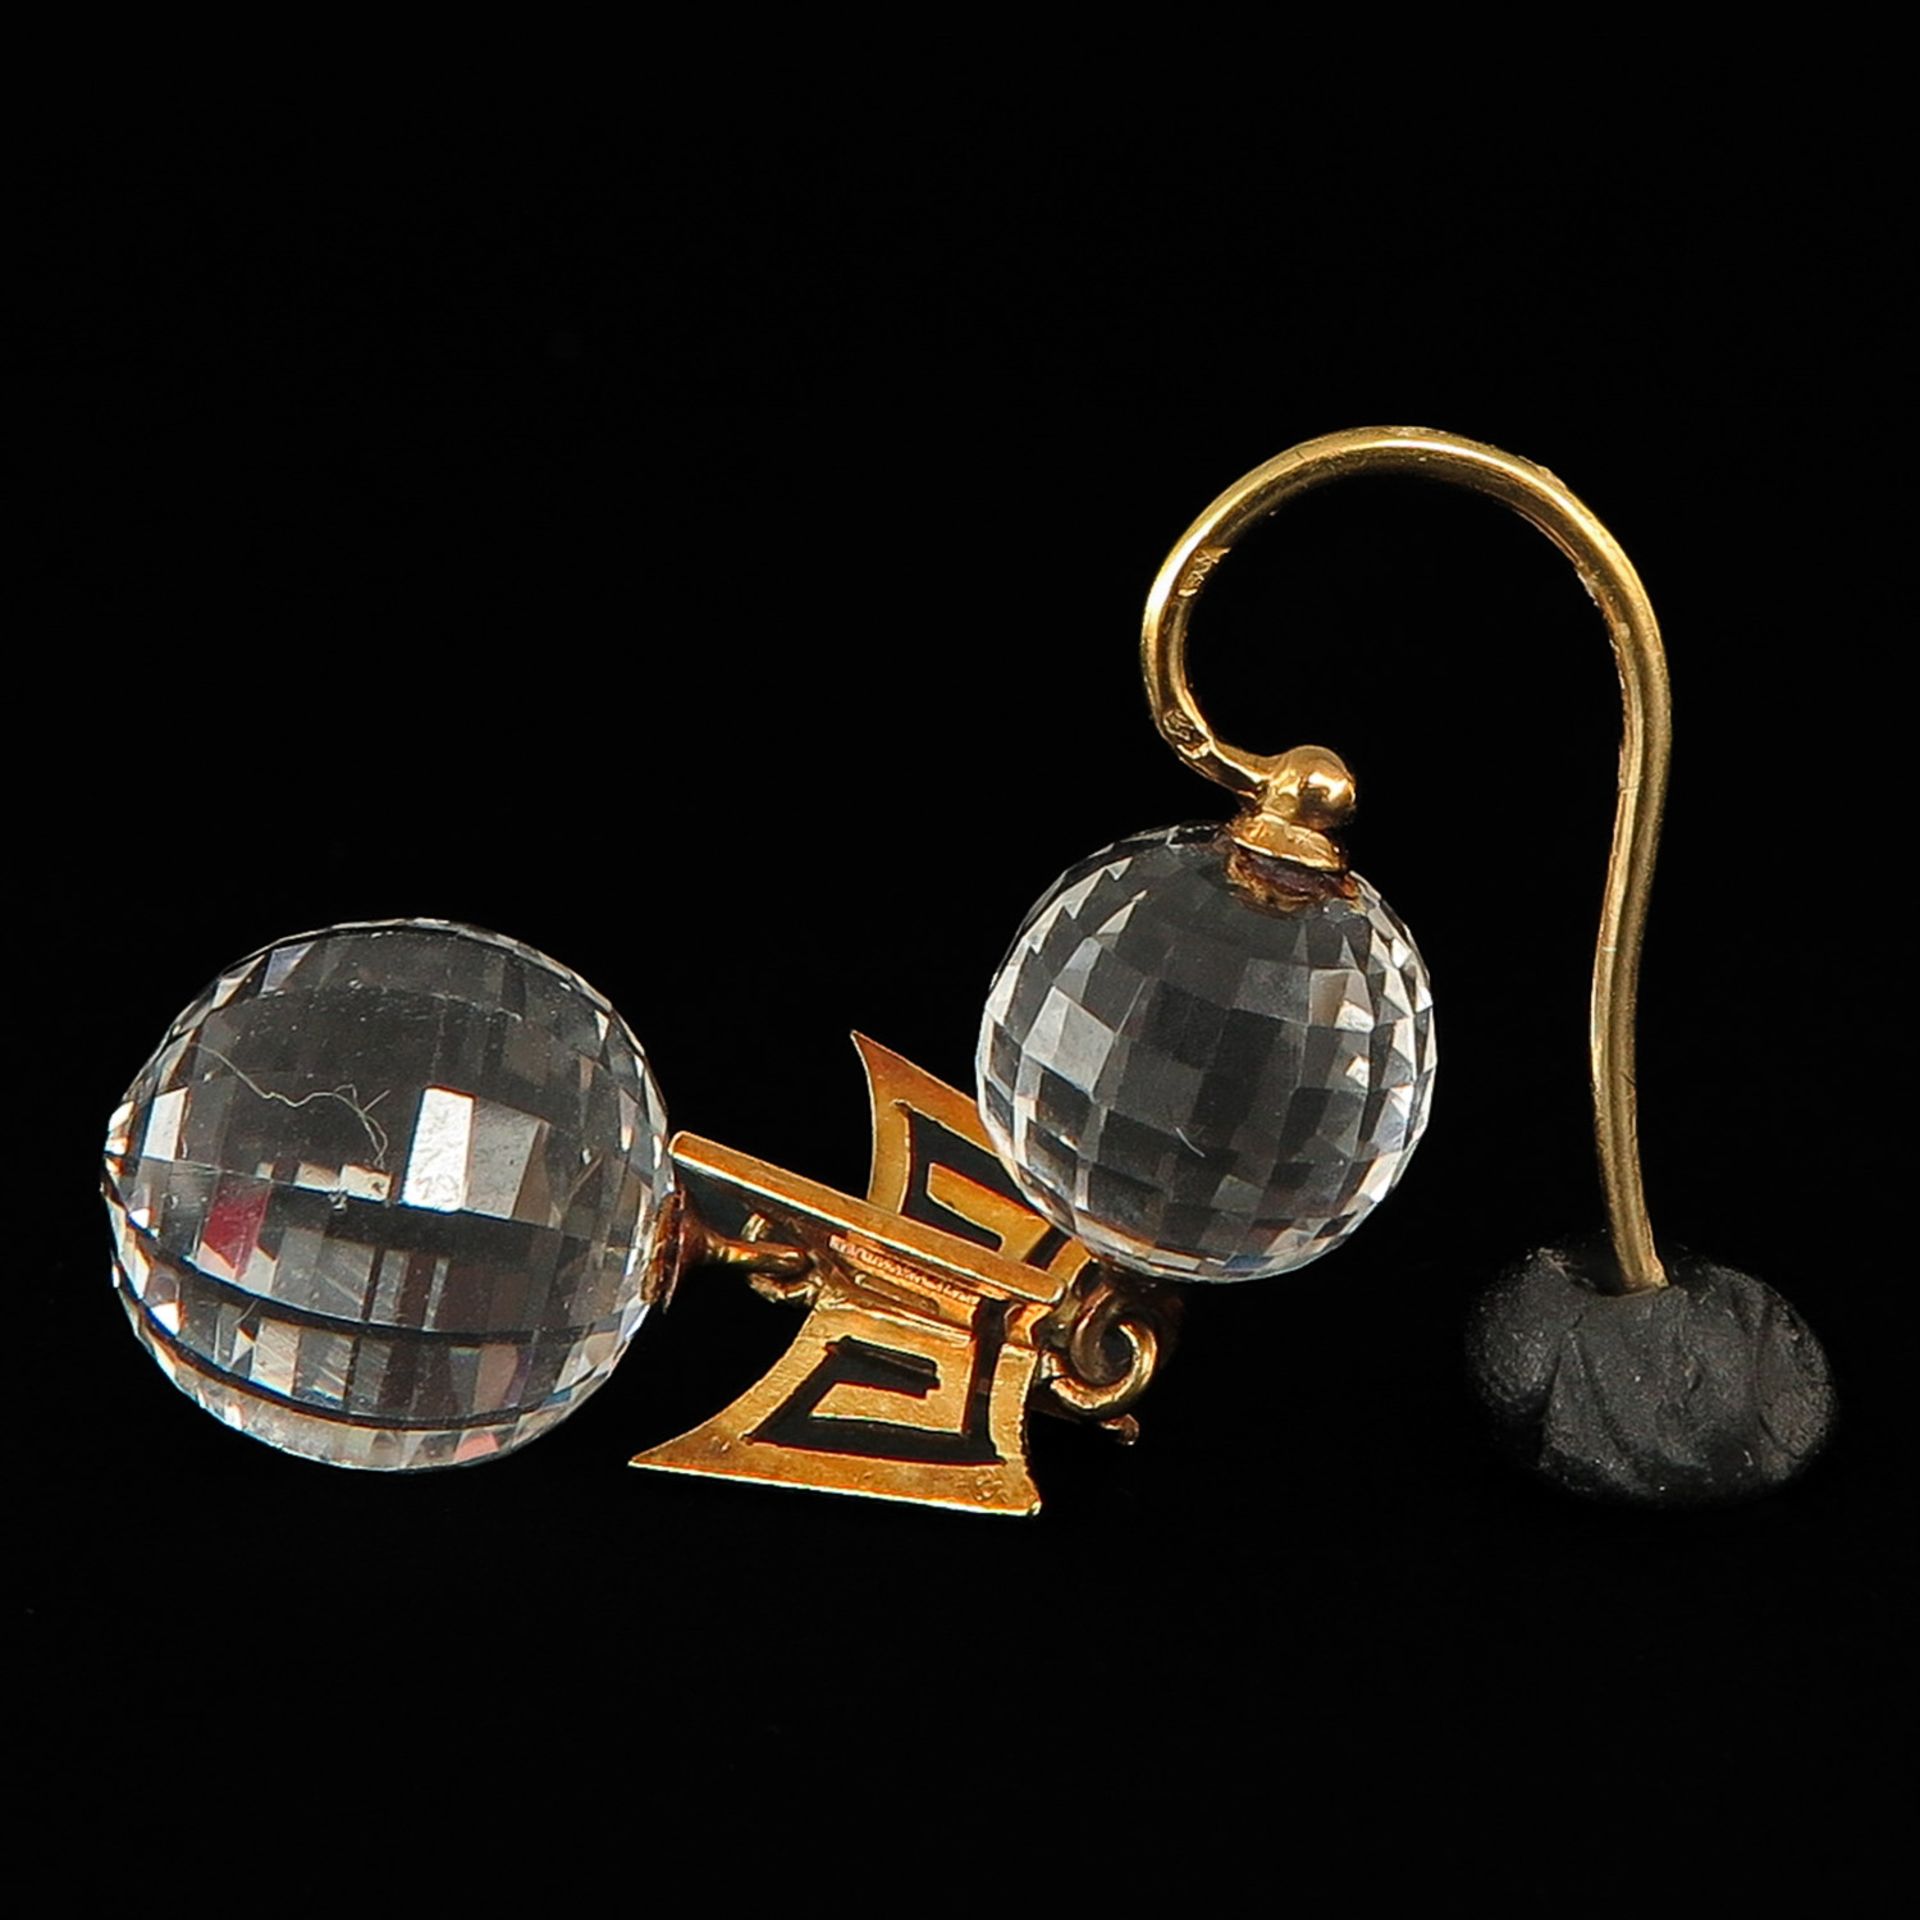 A Pair of Earring Set with Rock Crystal - Image 3 of 4